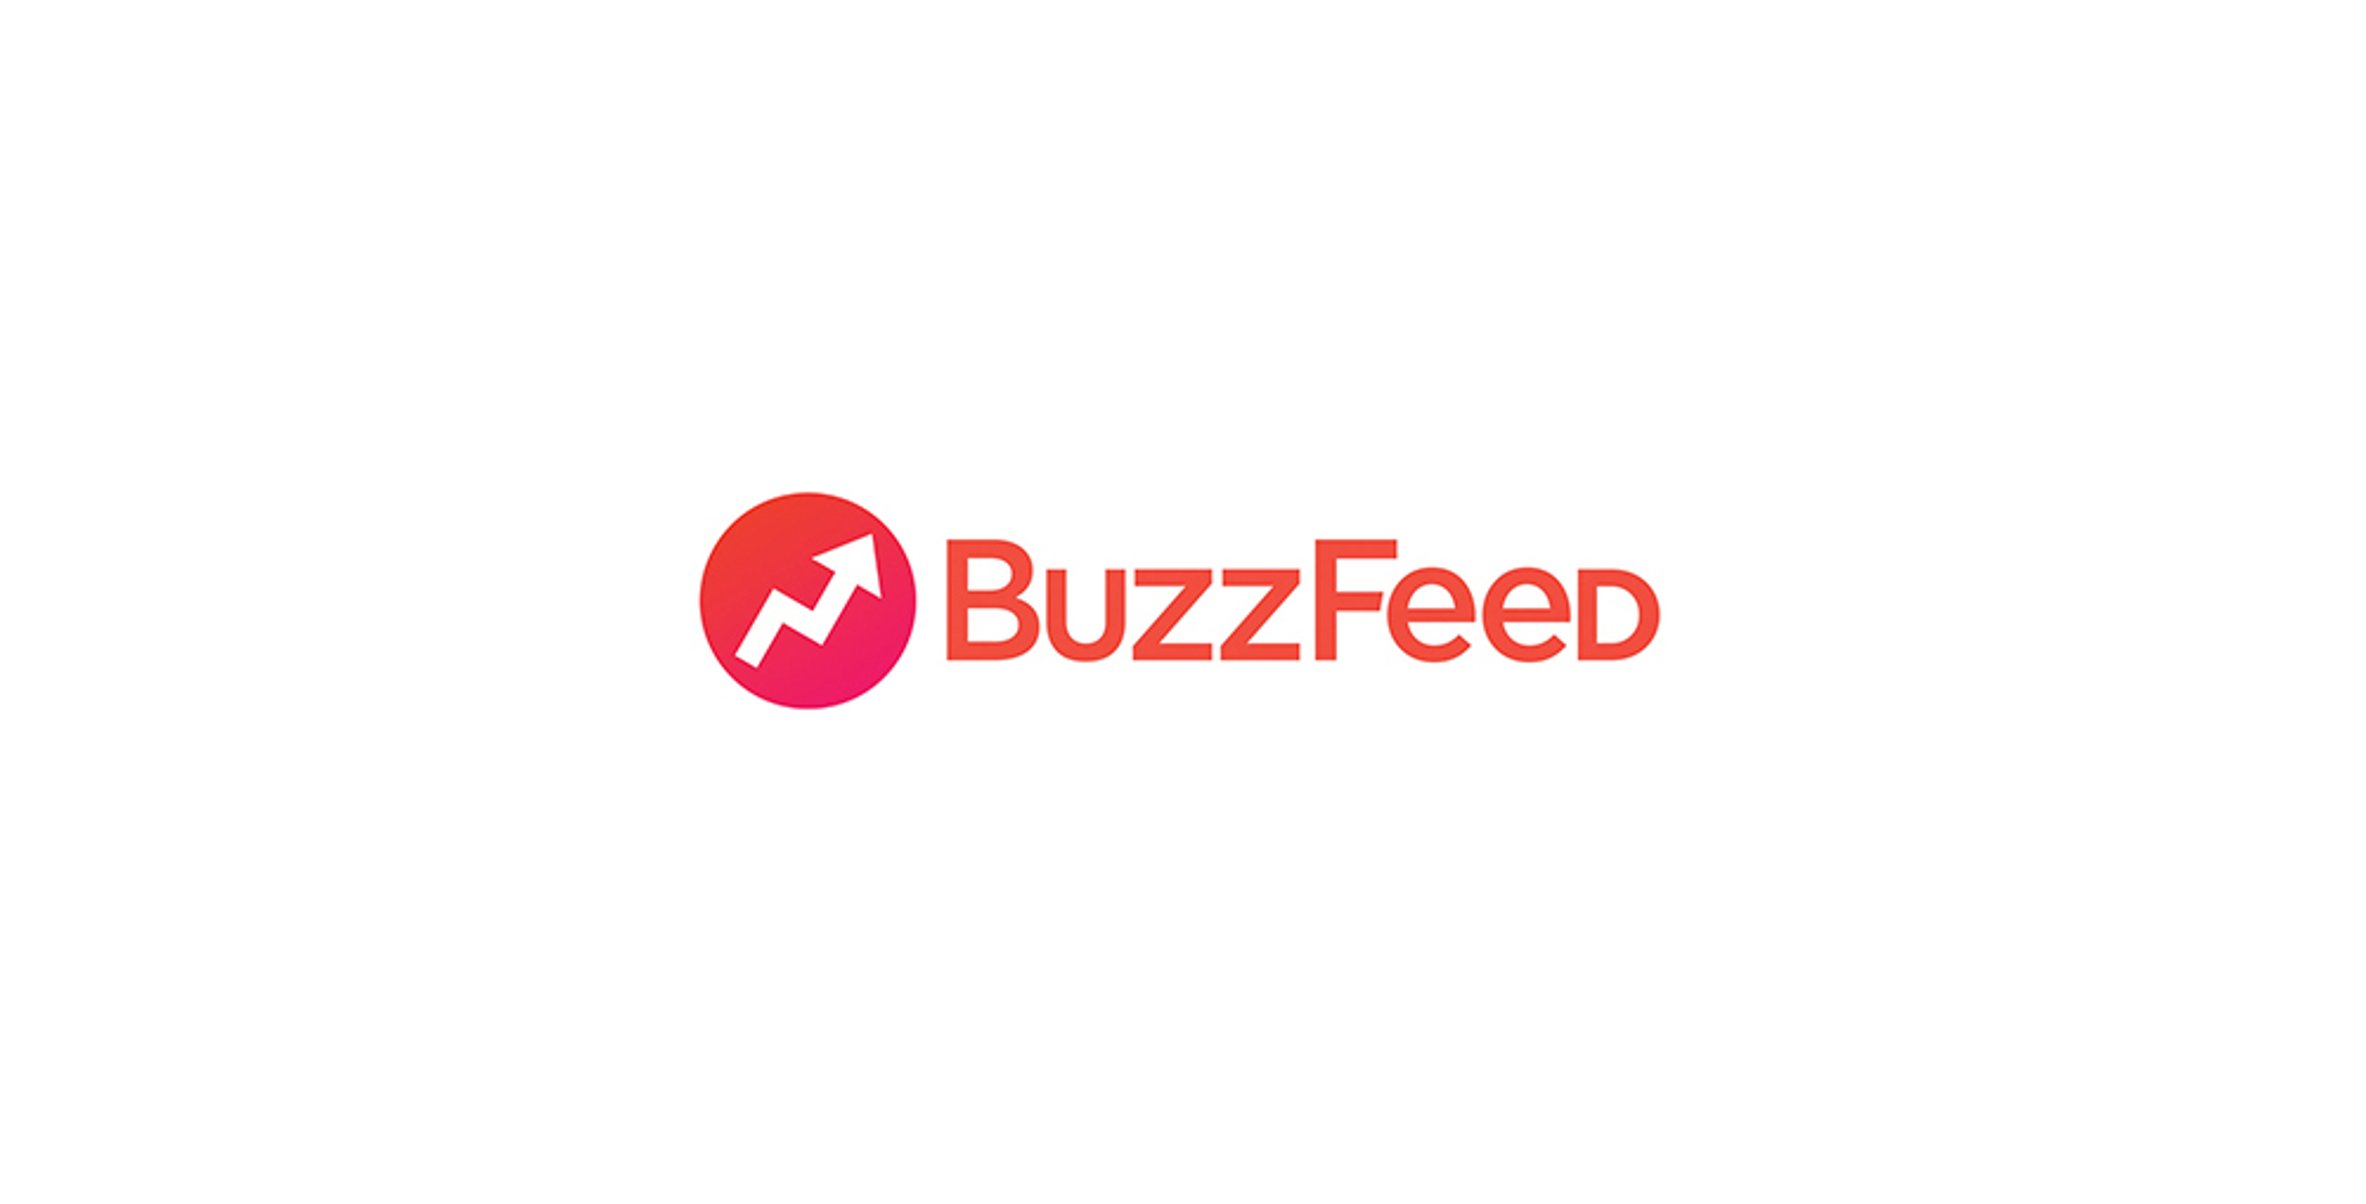 Casting Doctors & Nurses For A BuzzFeed Video